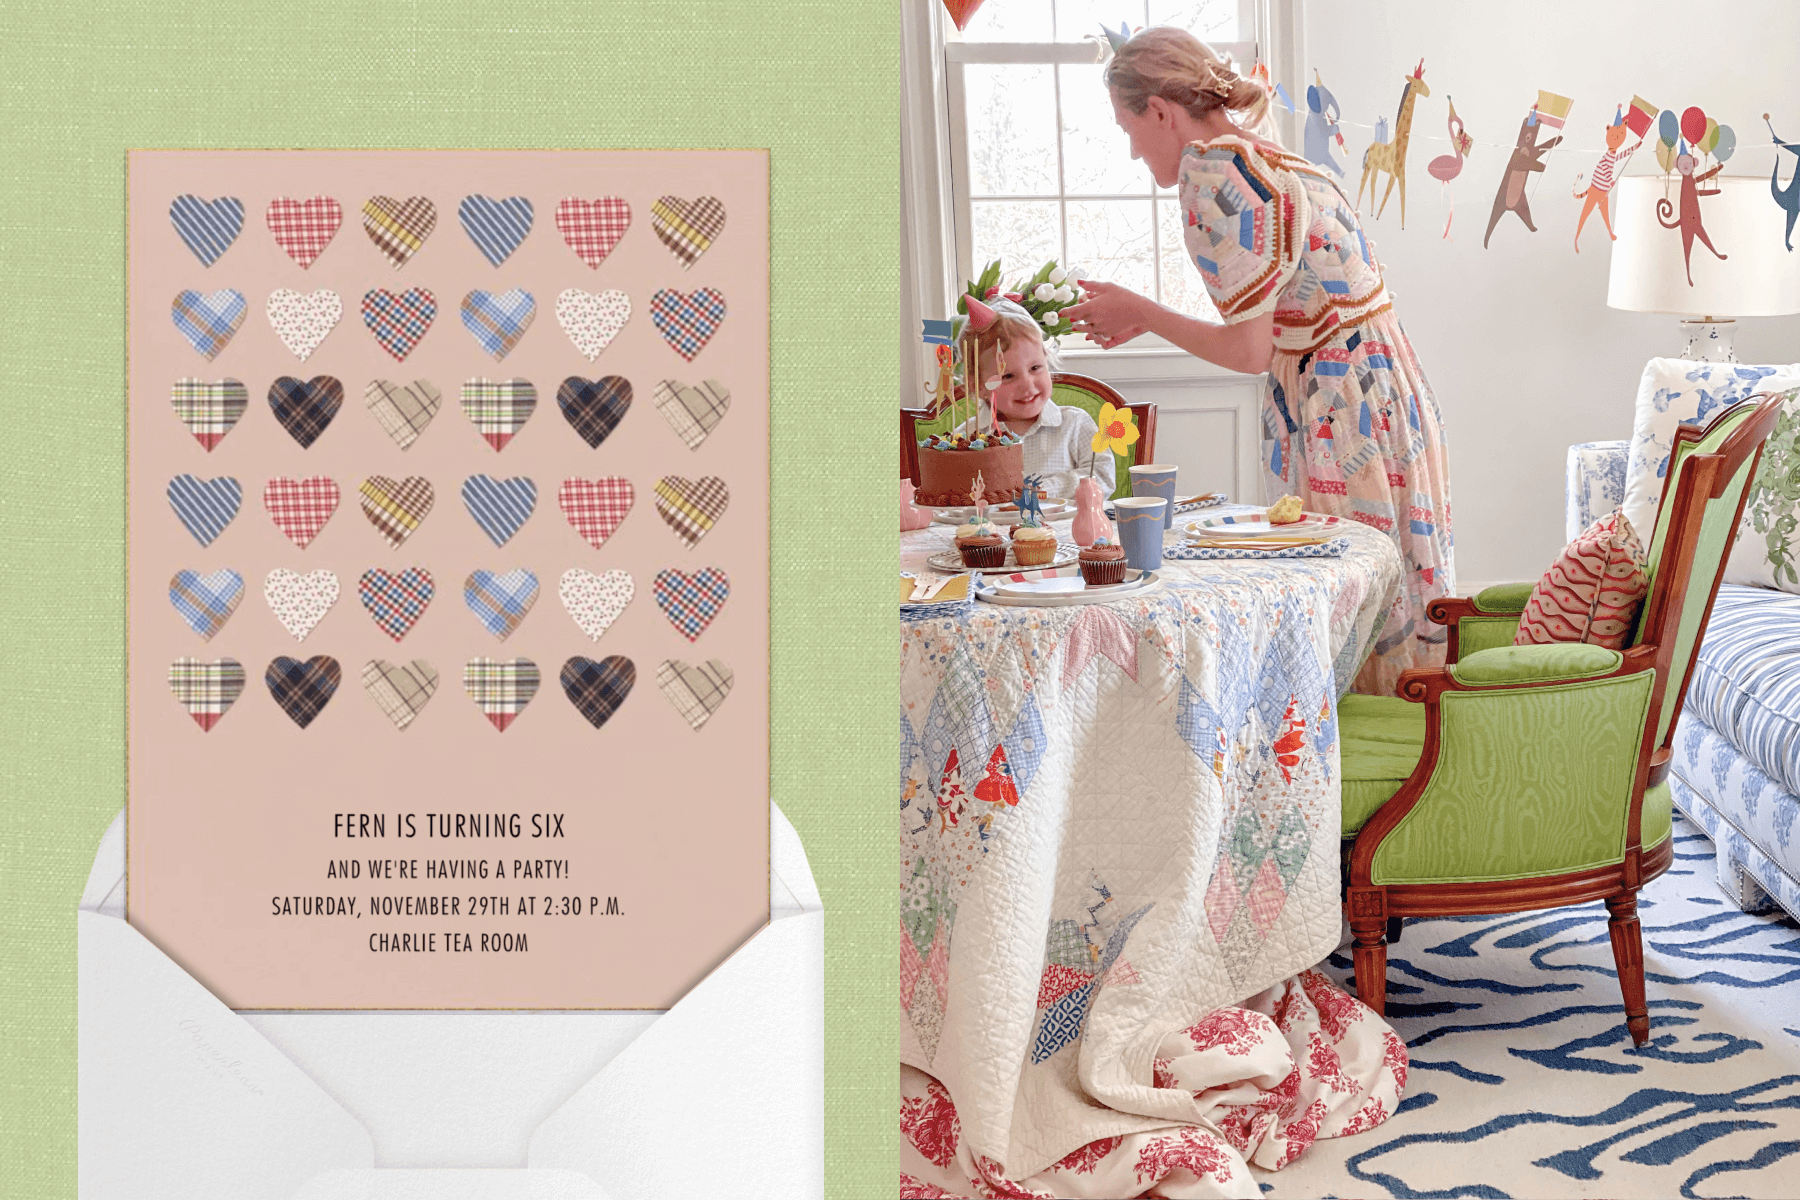 Left: Light pink birthday party invitation featuring rows of quilted hearts. Right: Woman, Eliza Harris of Sister Parish, serves her son chocolate cake while wearing a colorful quilted dress. The table is set with a quilted tablecloth and animal-themed birthday party decorations. 